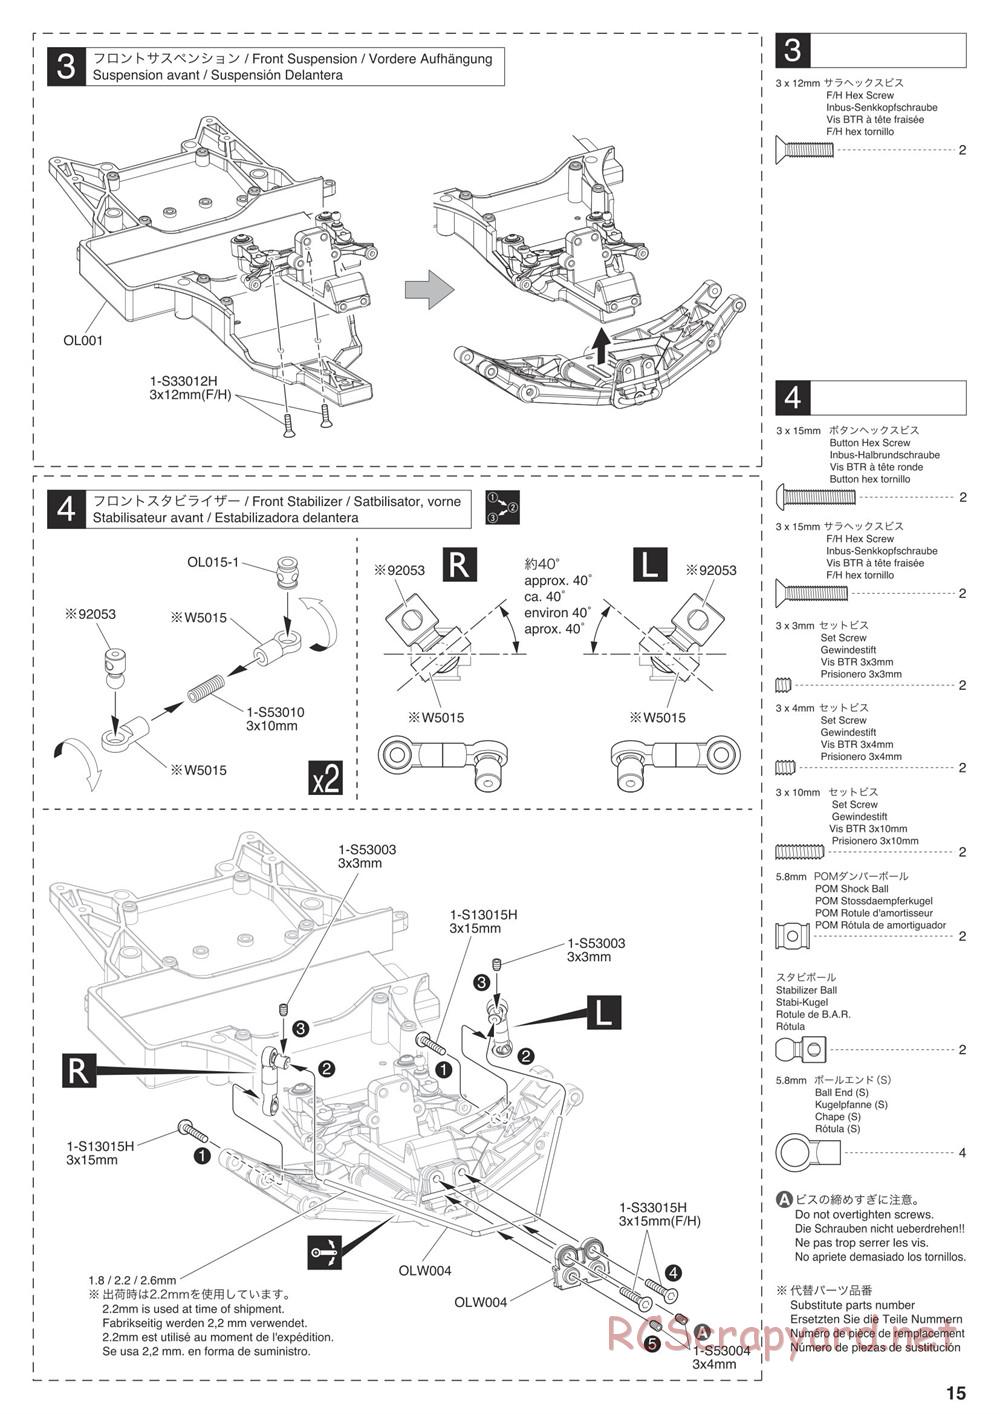 Kyosho - Outlaw Rampage Pro - Manual - Page 15